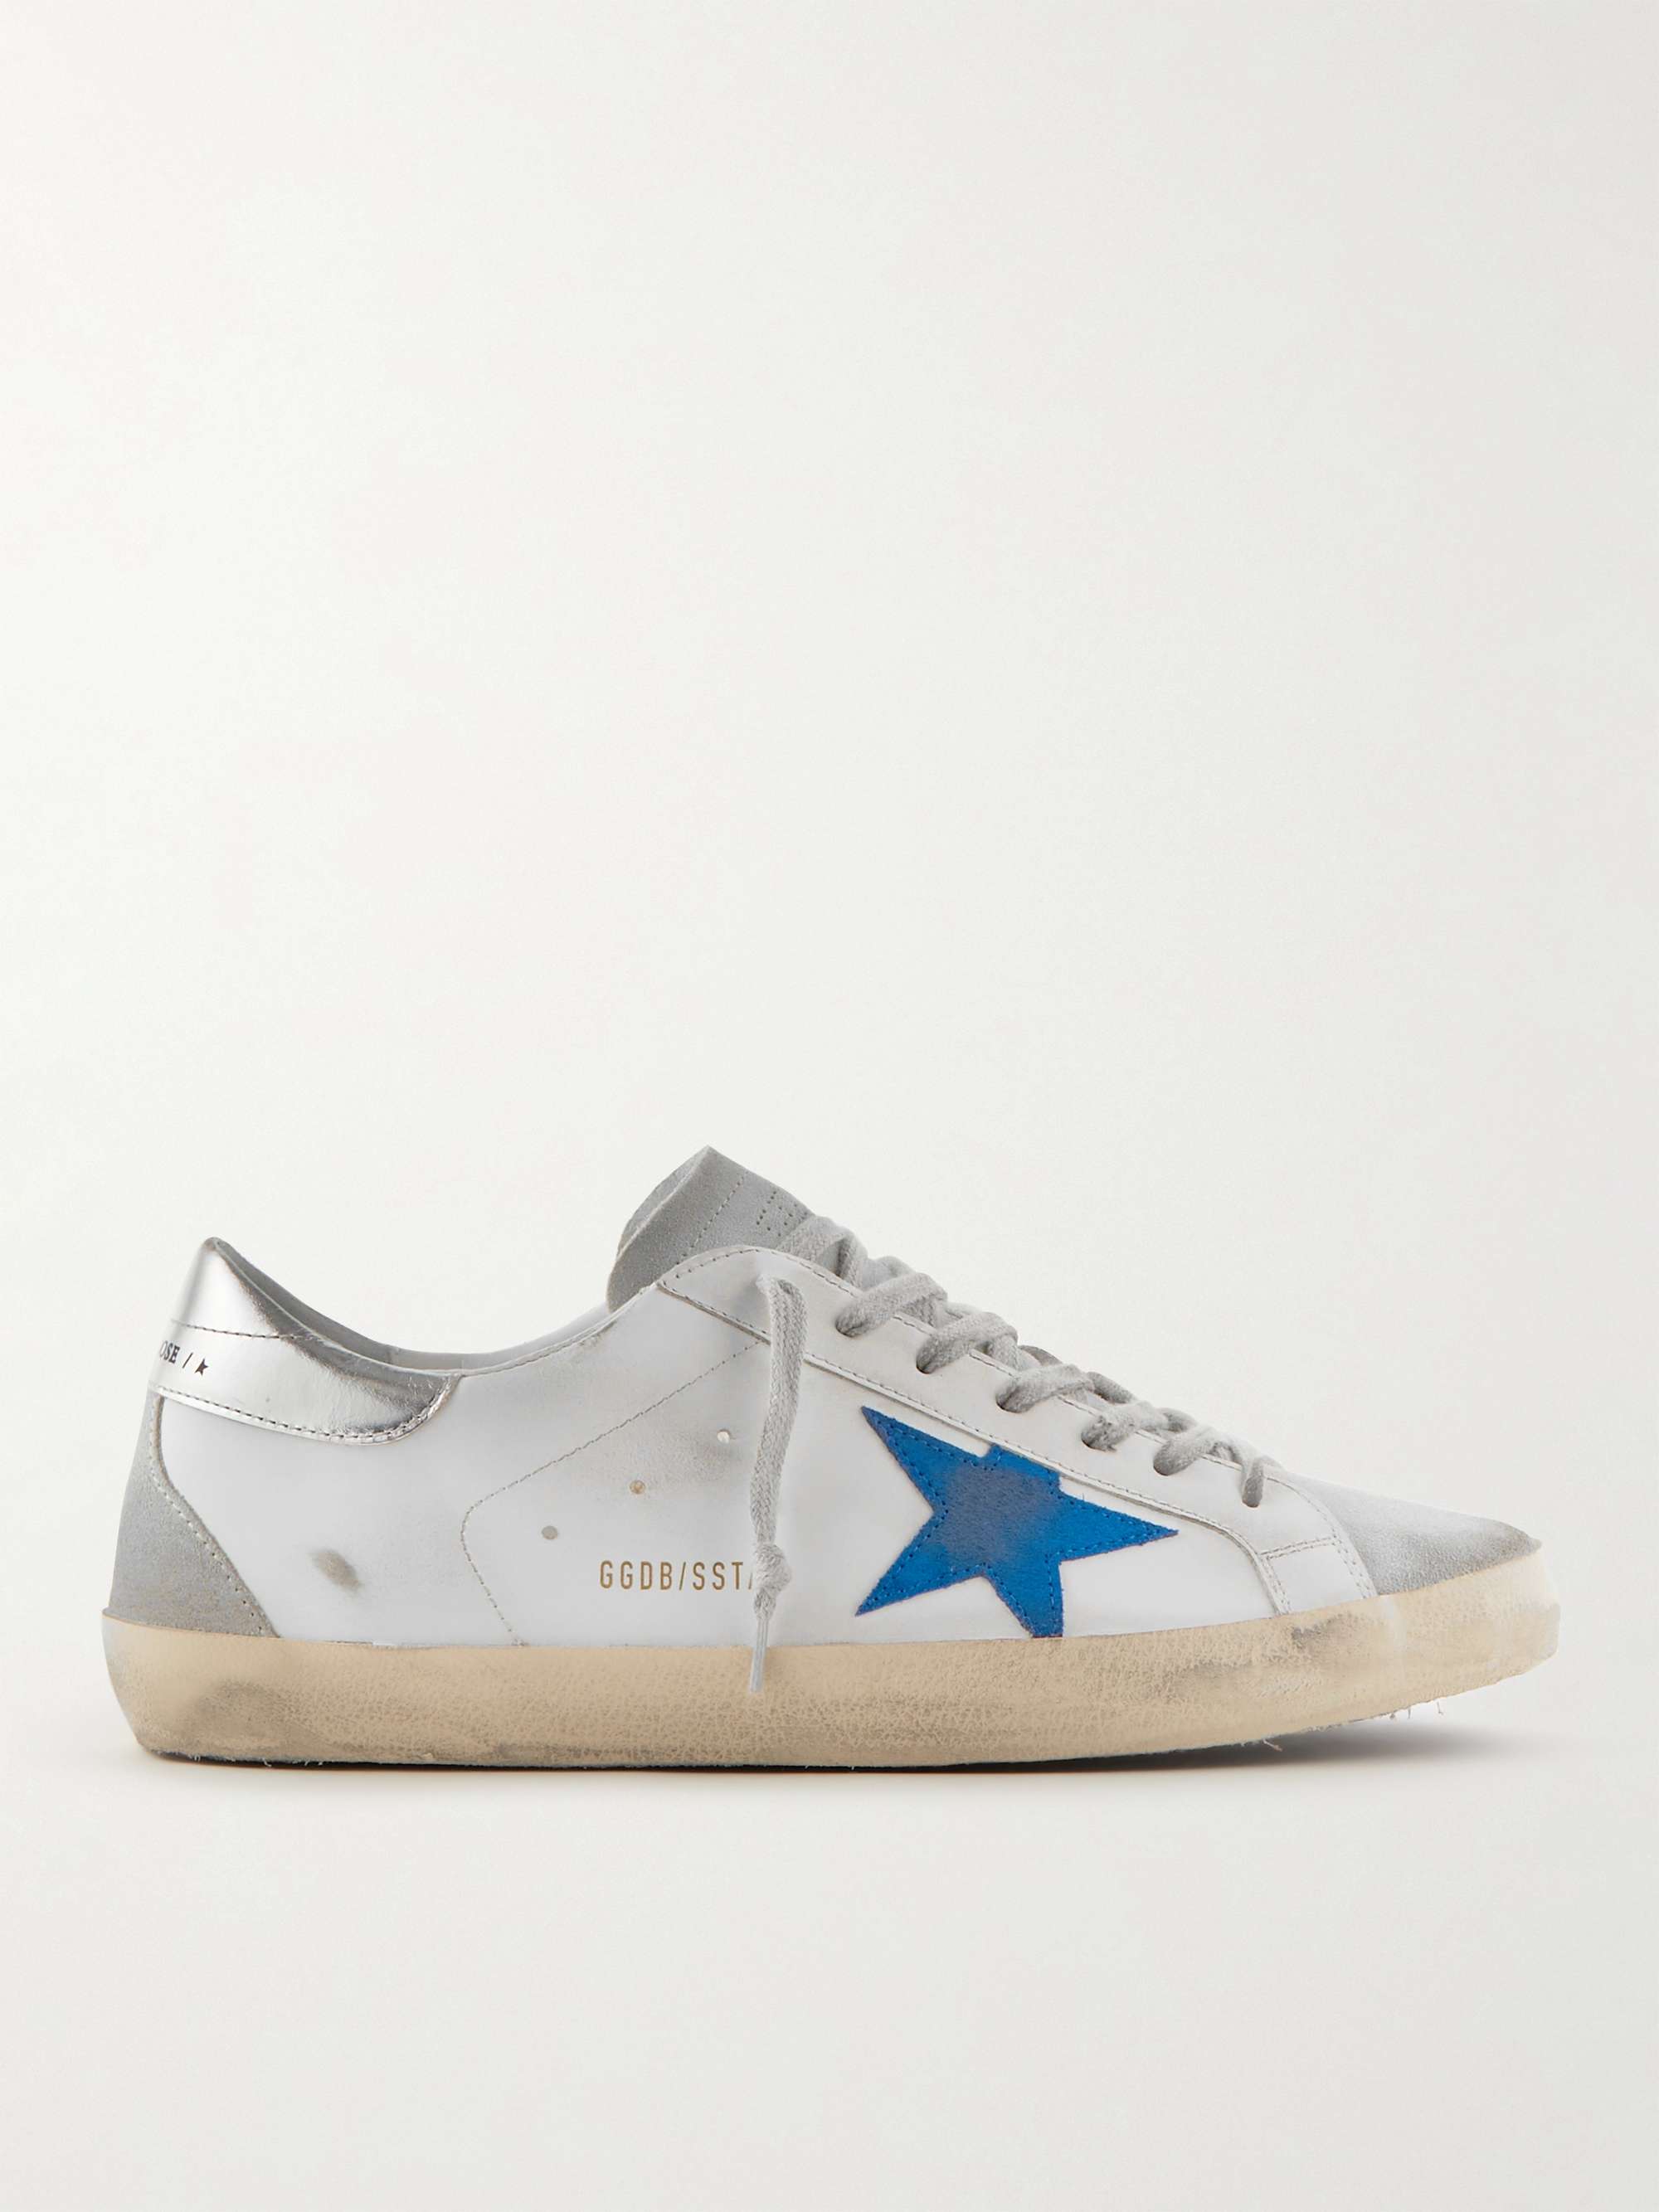 White Superstar Distressed Leather and Suede Sneakers | GOLDEN GOOSE | MR  PORTER